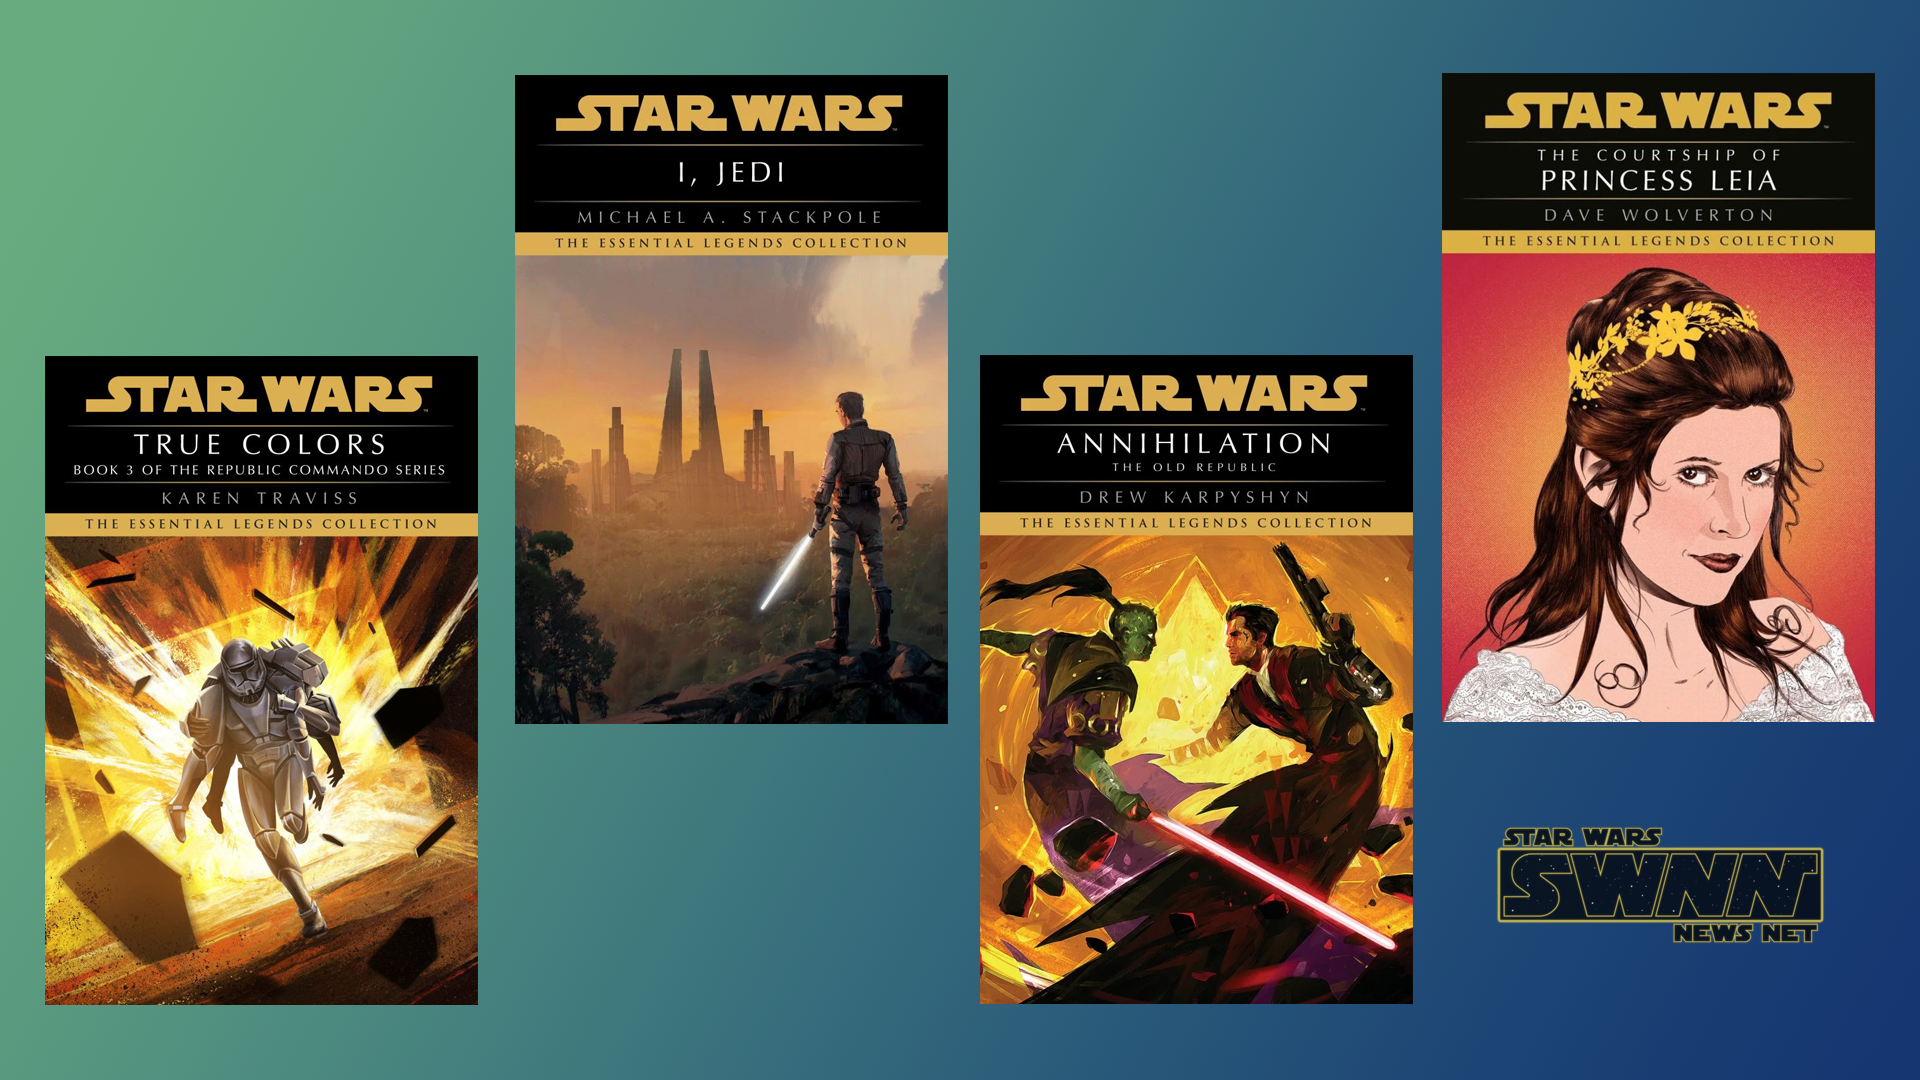 The 8 Star Wars Legends stories that could shape The Rise of Skywalker